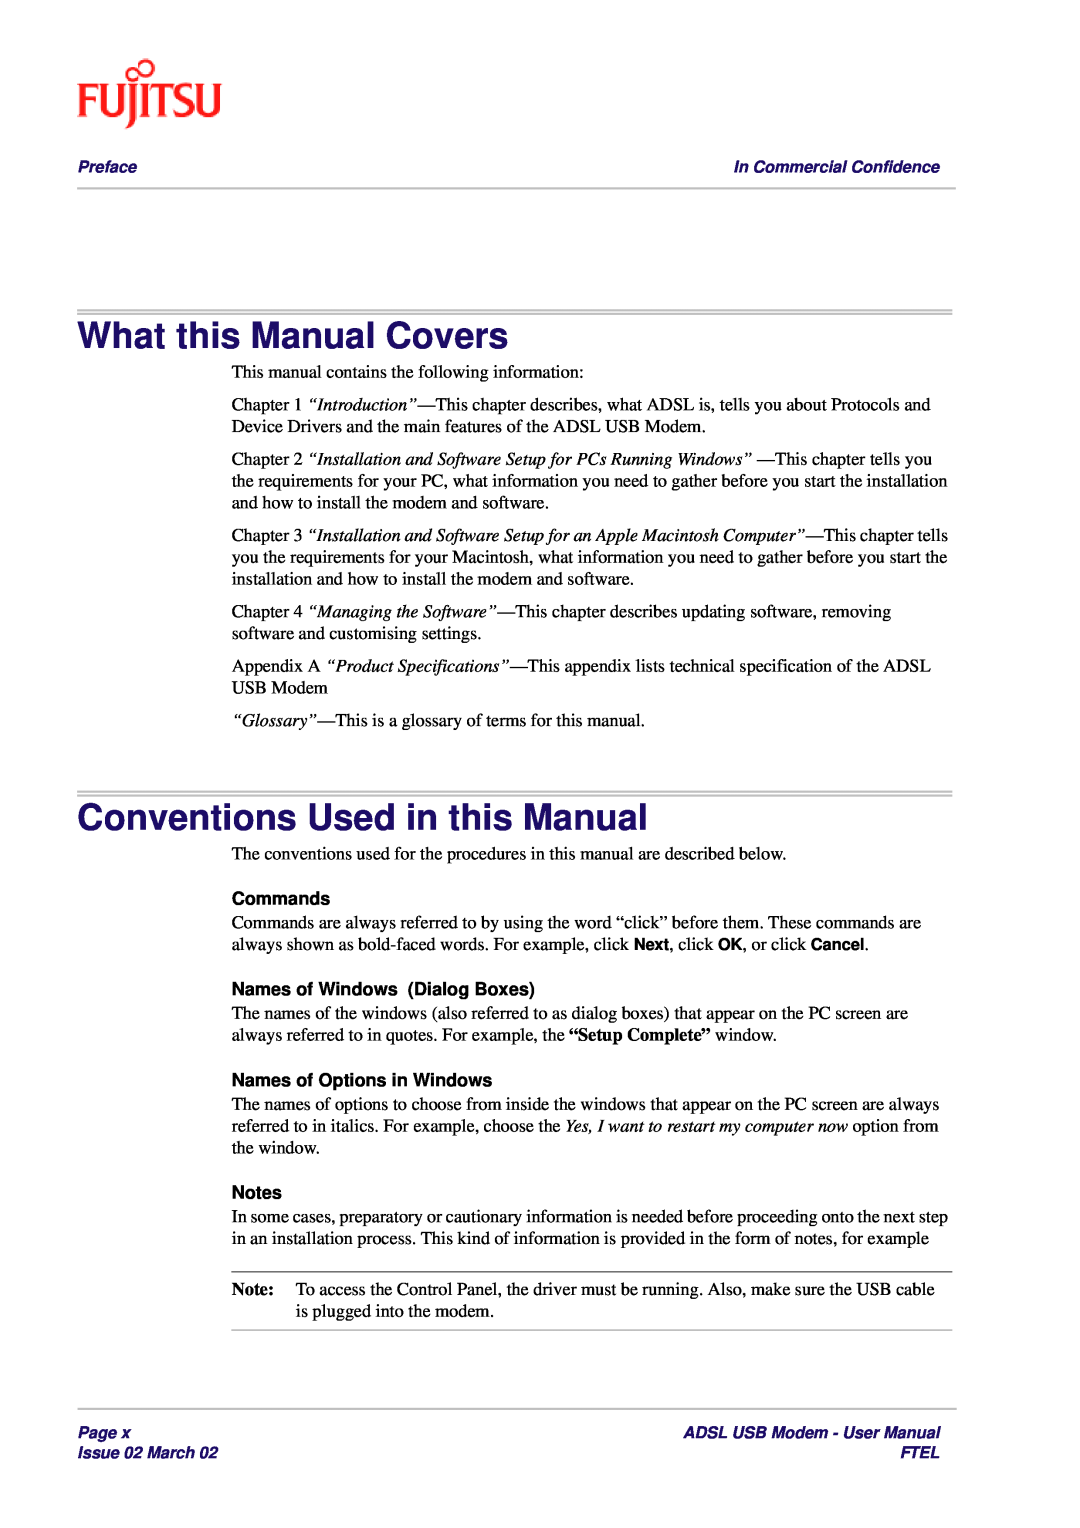 Fujitsu 3XAX-00803AAS What this Manual Covers, Conventions Used in this Manual, Commands, Names of Windows Dialog Boxes 